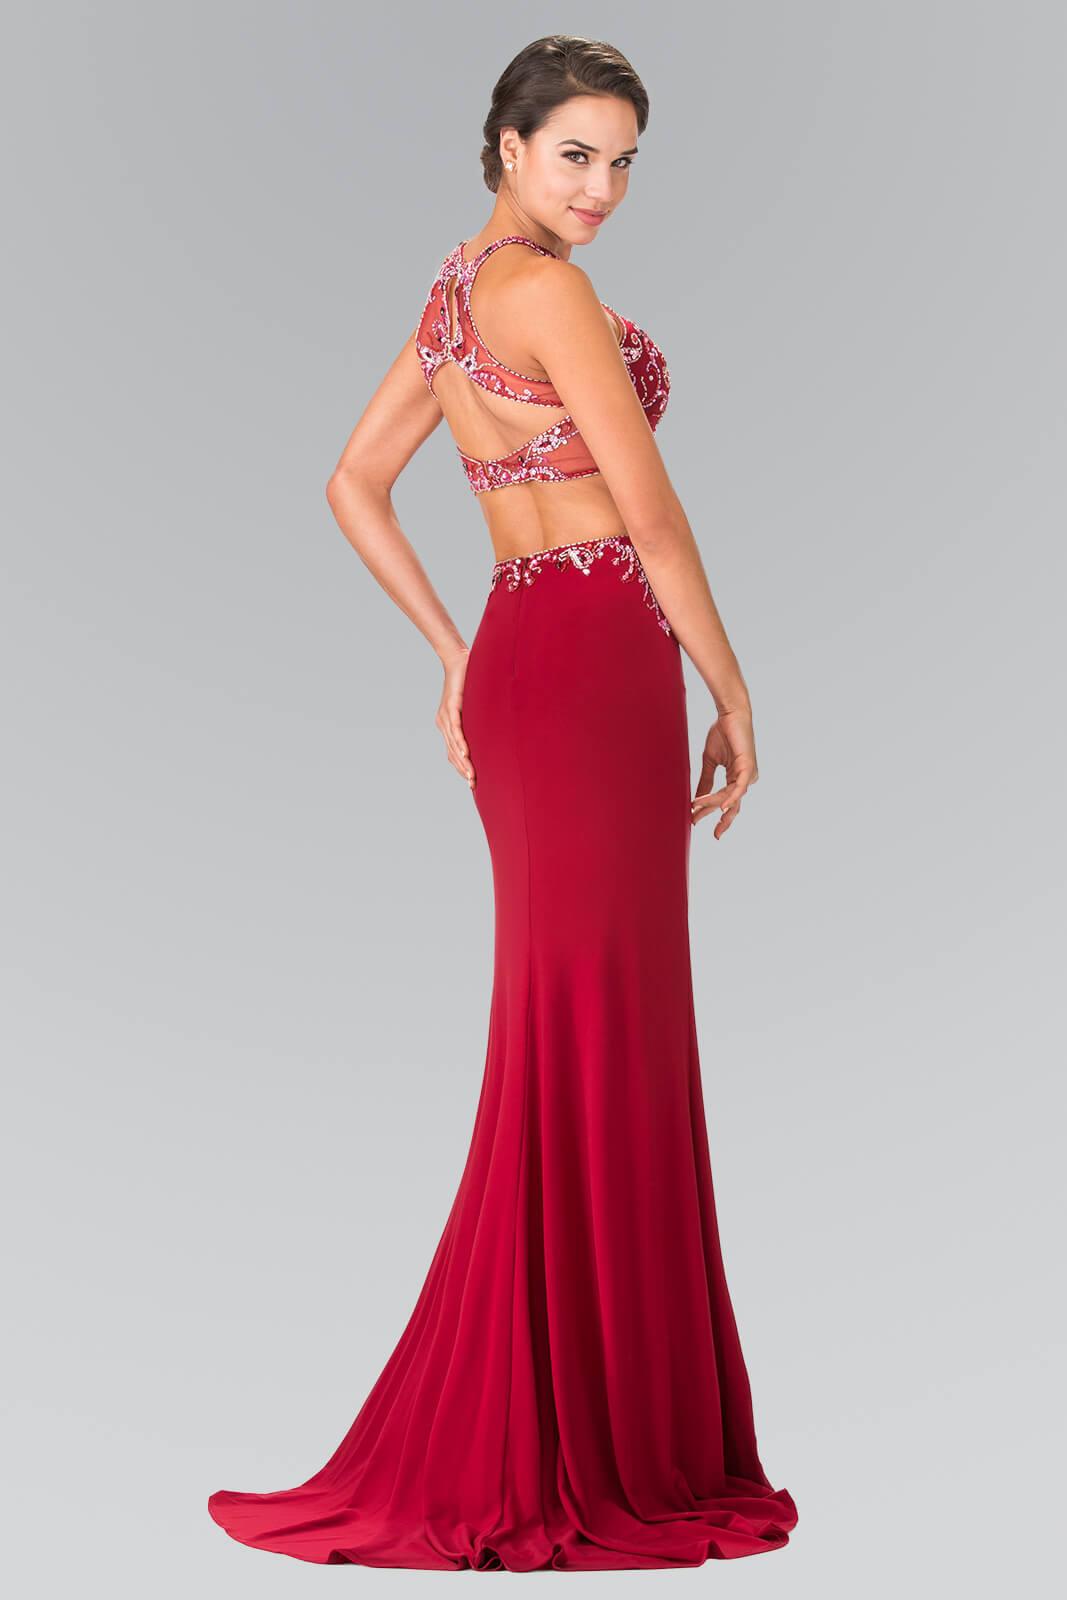 Prom 2 Piece Sexy Halter Evening Gown - The Dress Outlet Elizabeth K